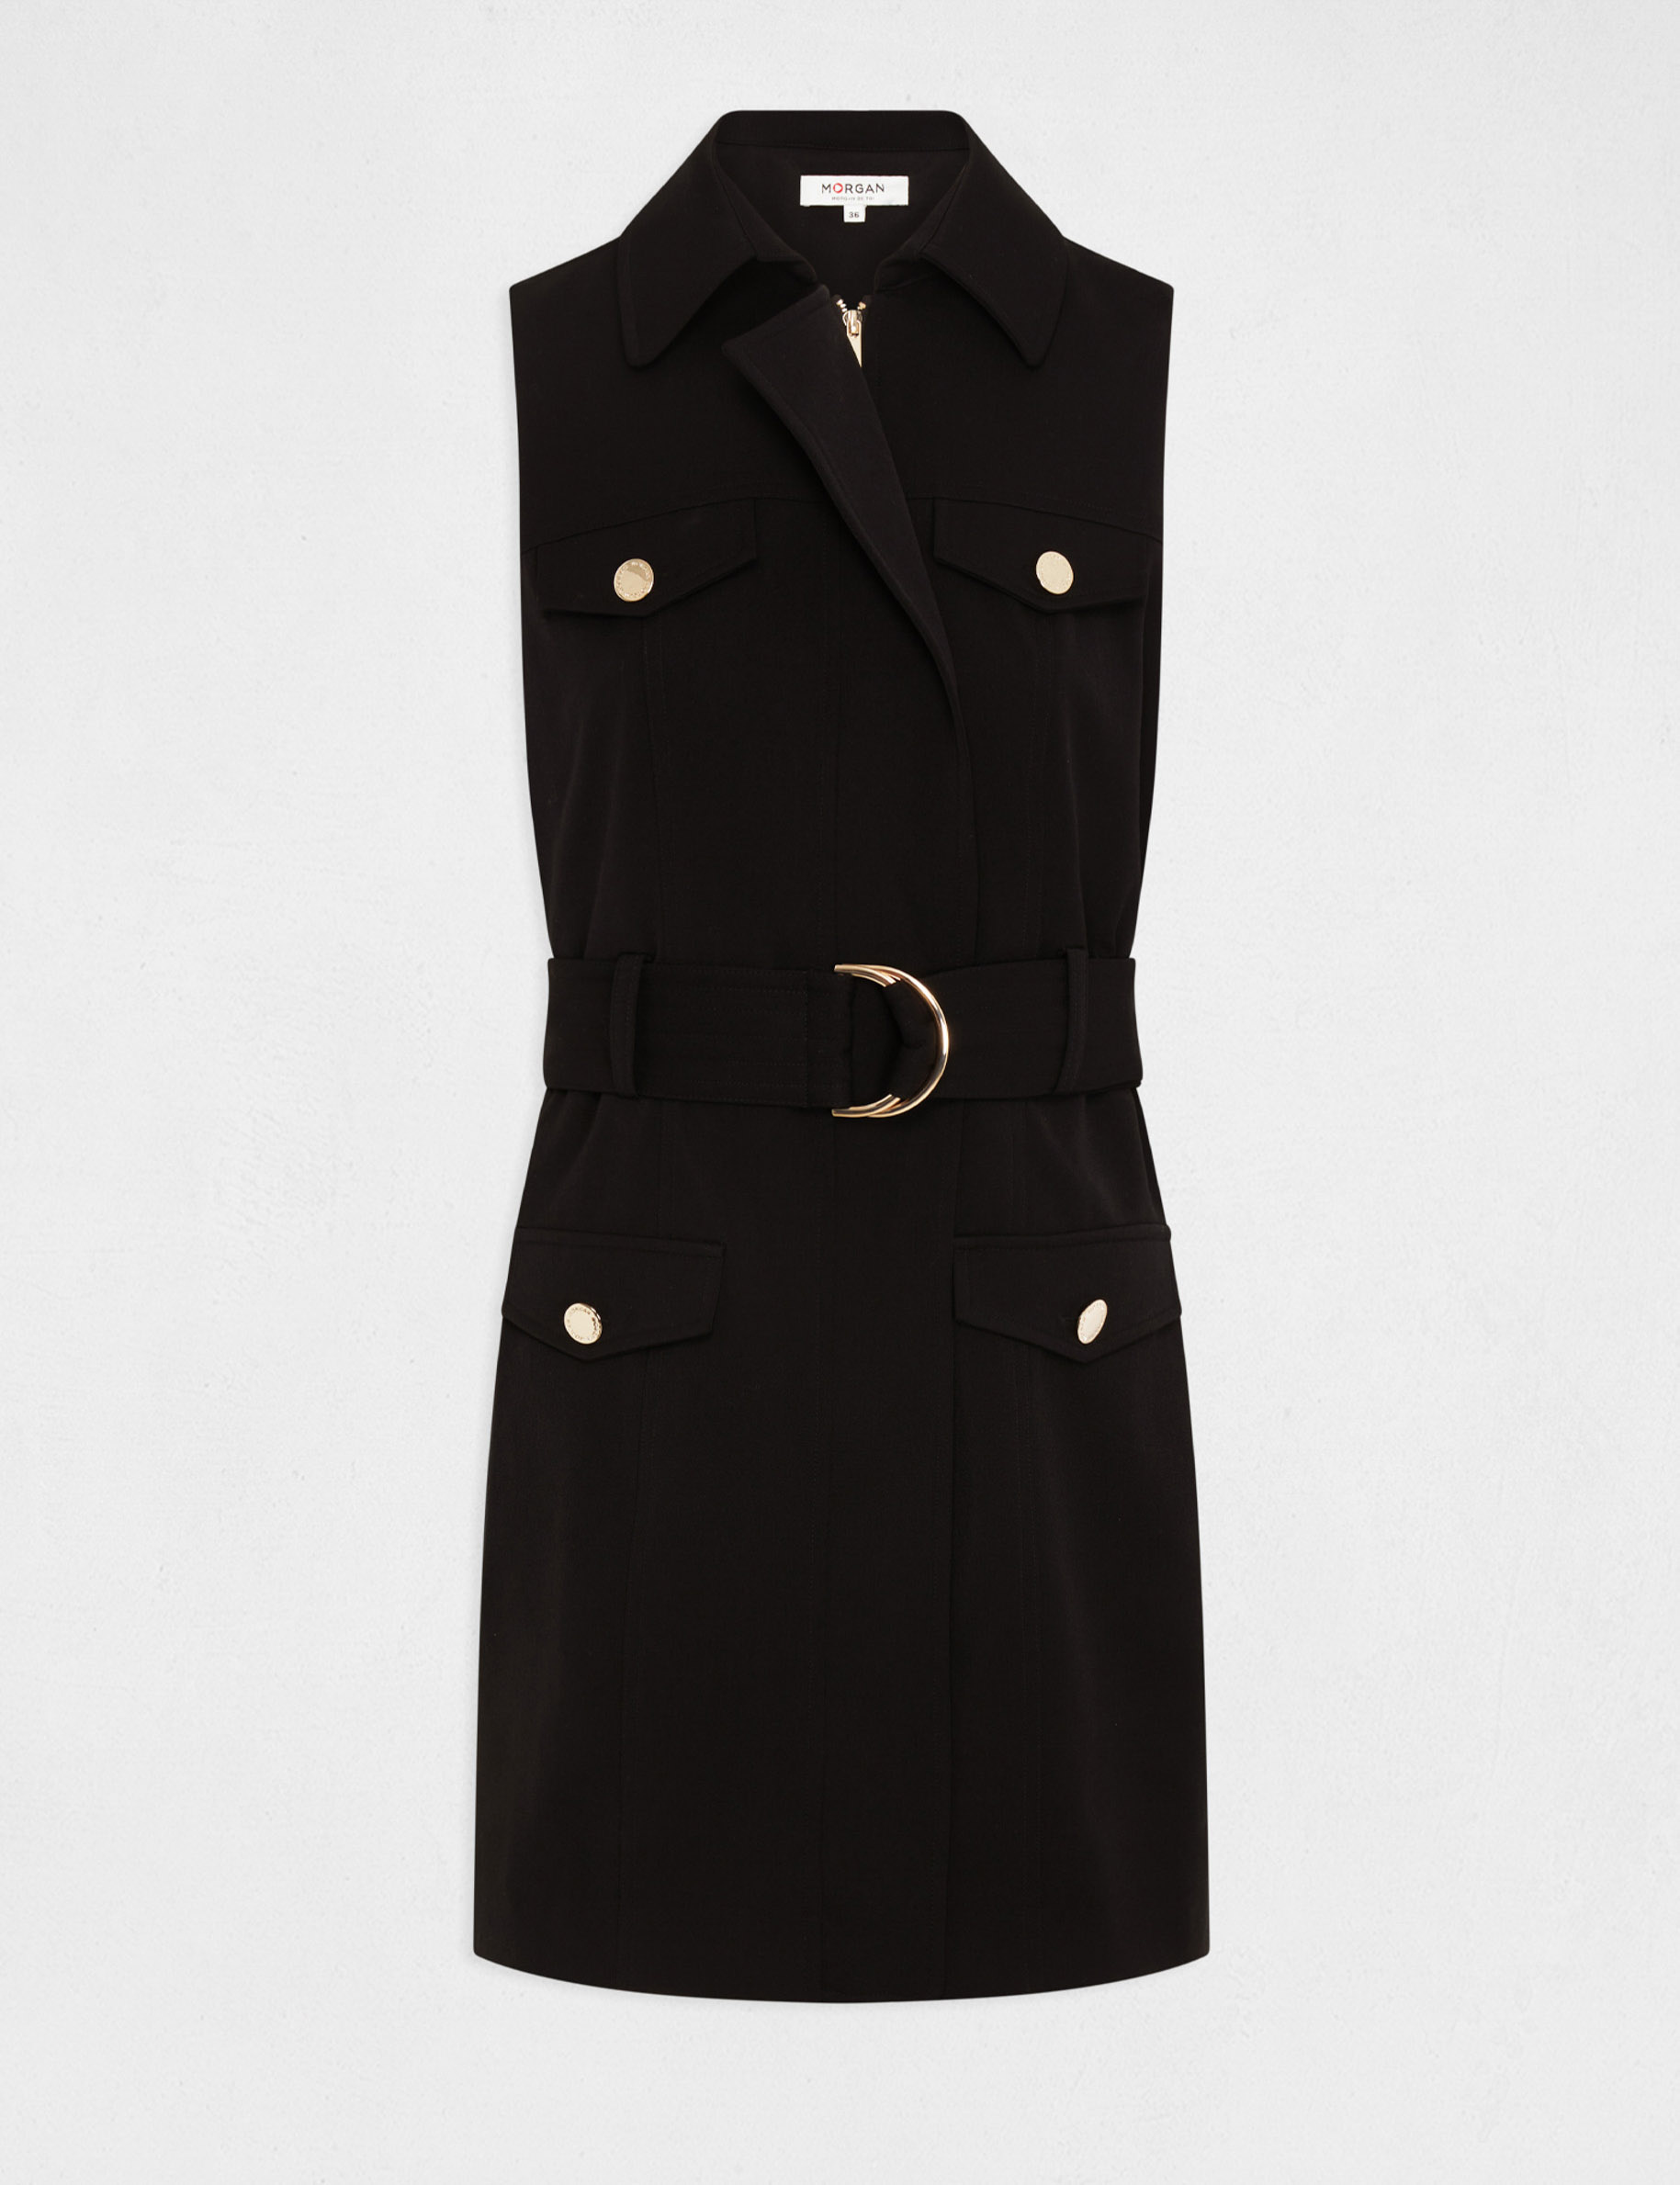 Waisted zipped and belted dress black ladies'